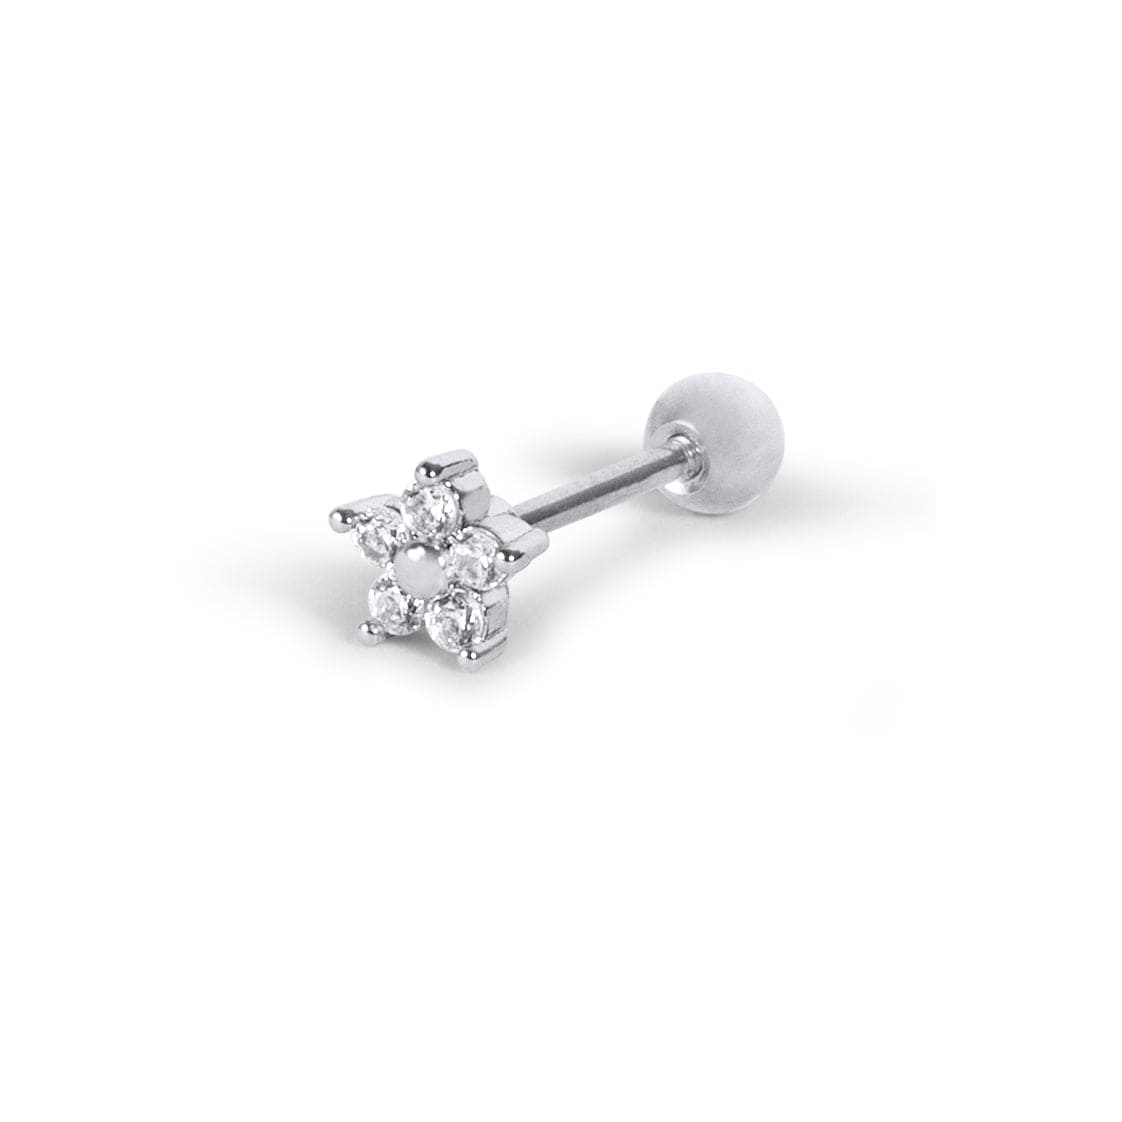 Twilight London Helix Piercing Silver Forget Me Not Piercing